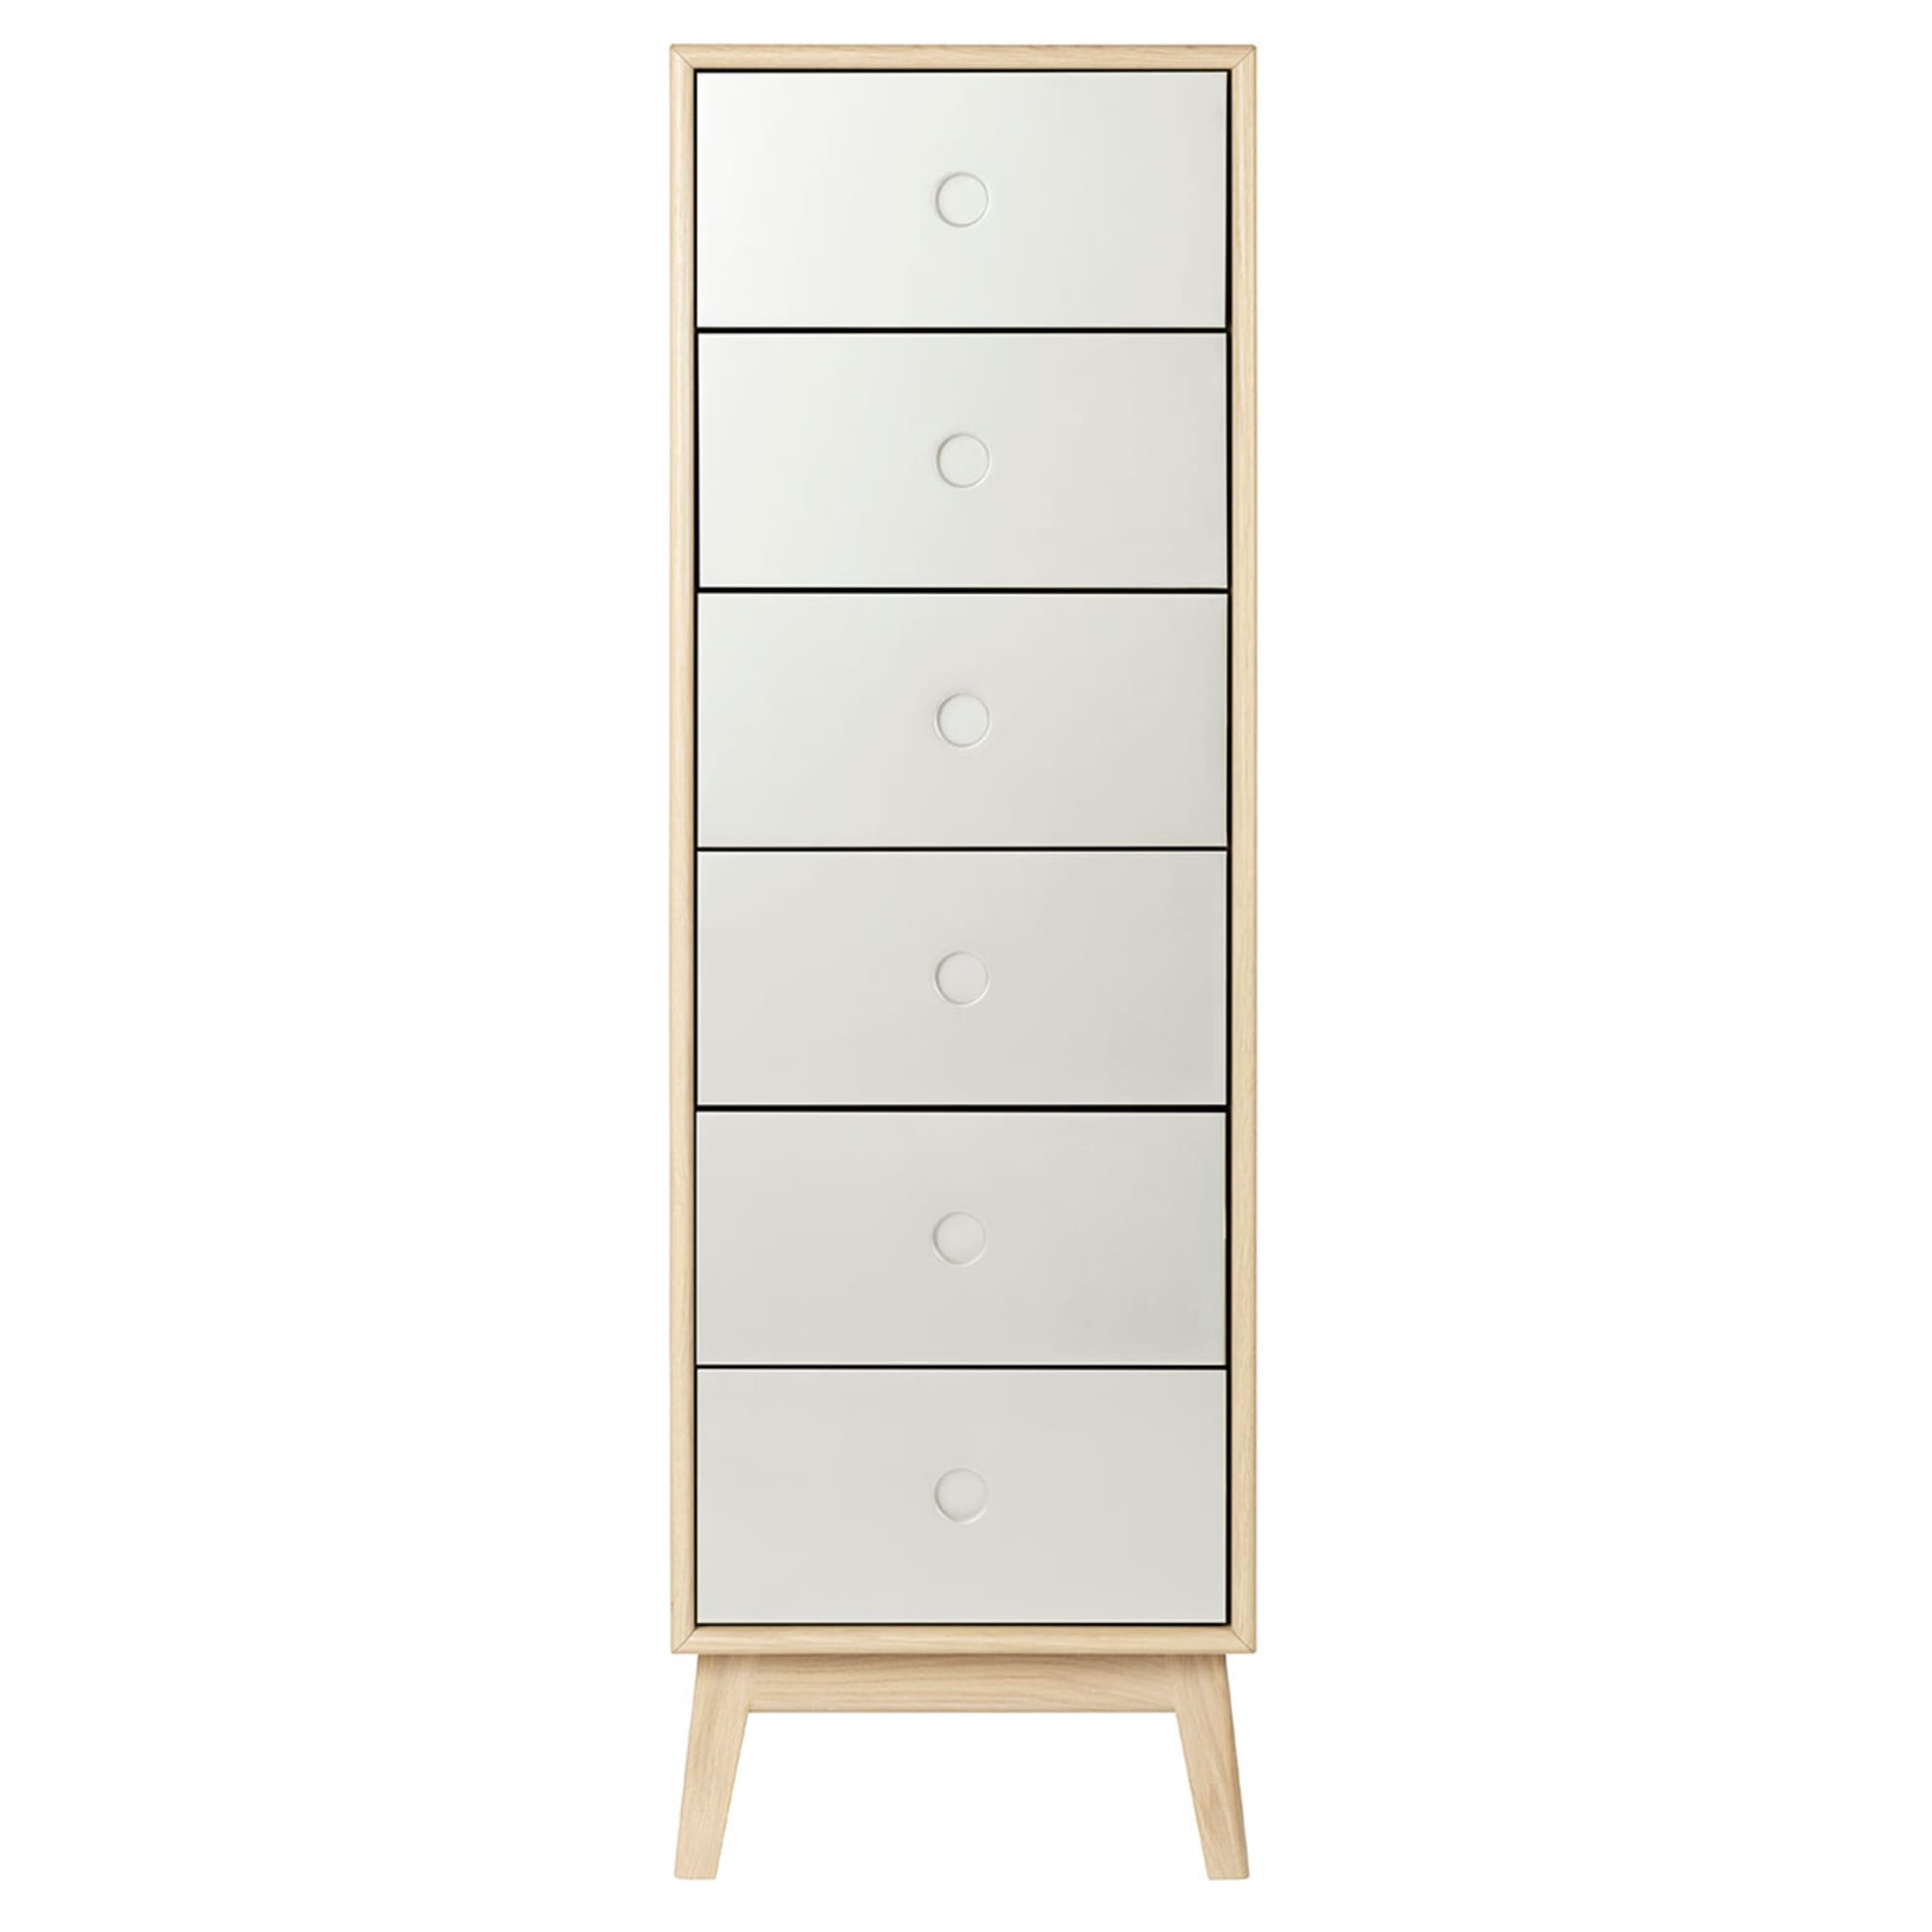 Fdb Møbler F23 Butler High Chest Of Drawers, Natural/White